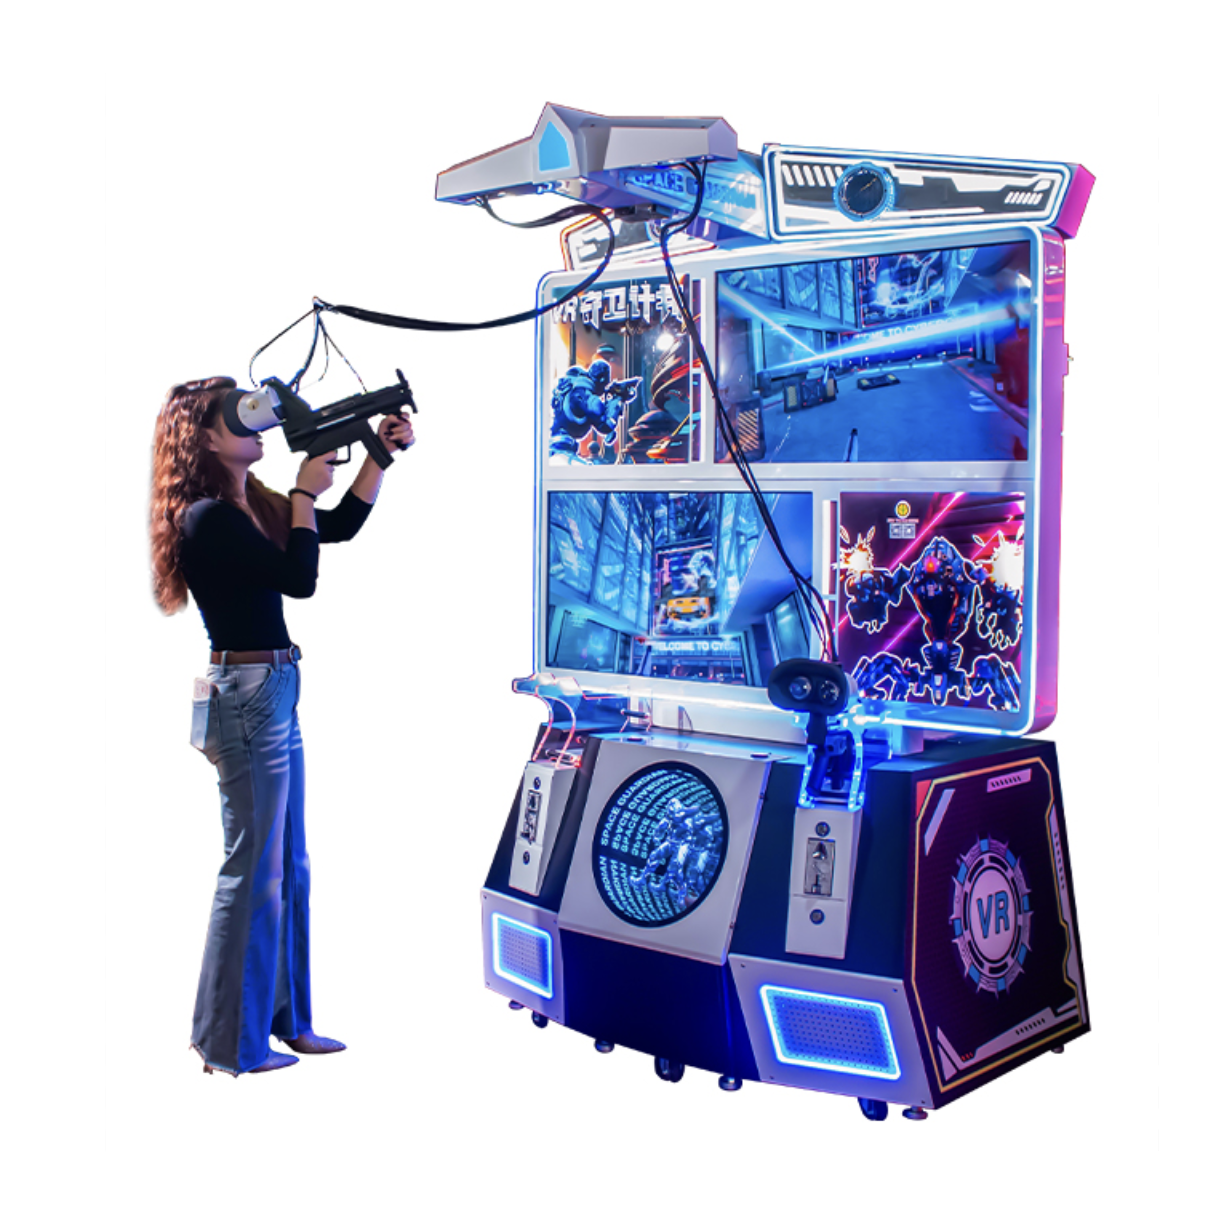 Most Popular Arcade AR Shooting Games For Sale Made In China